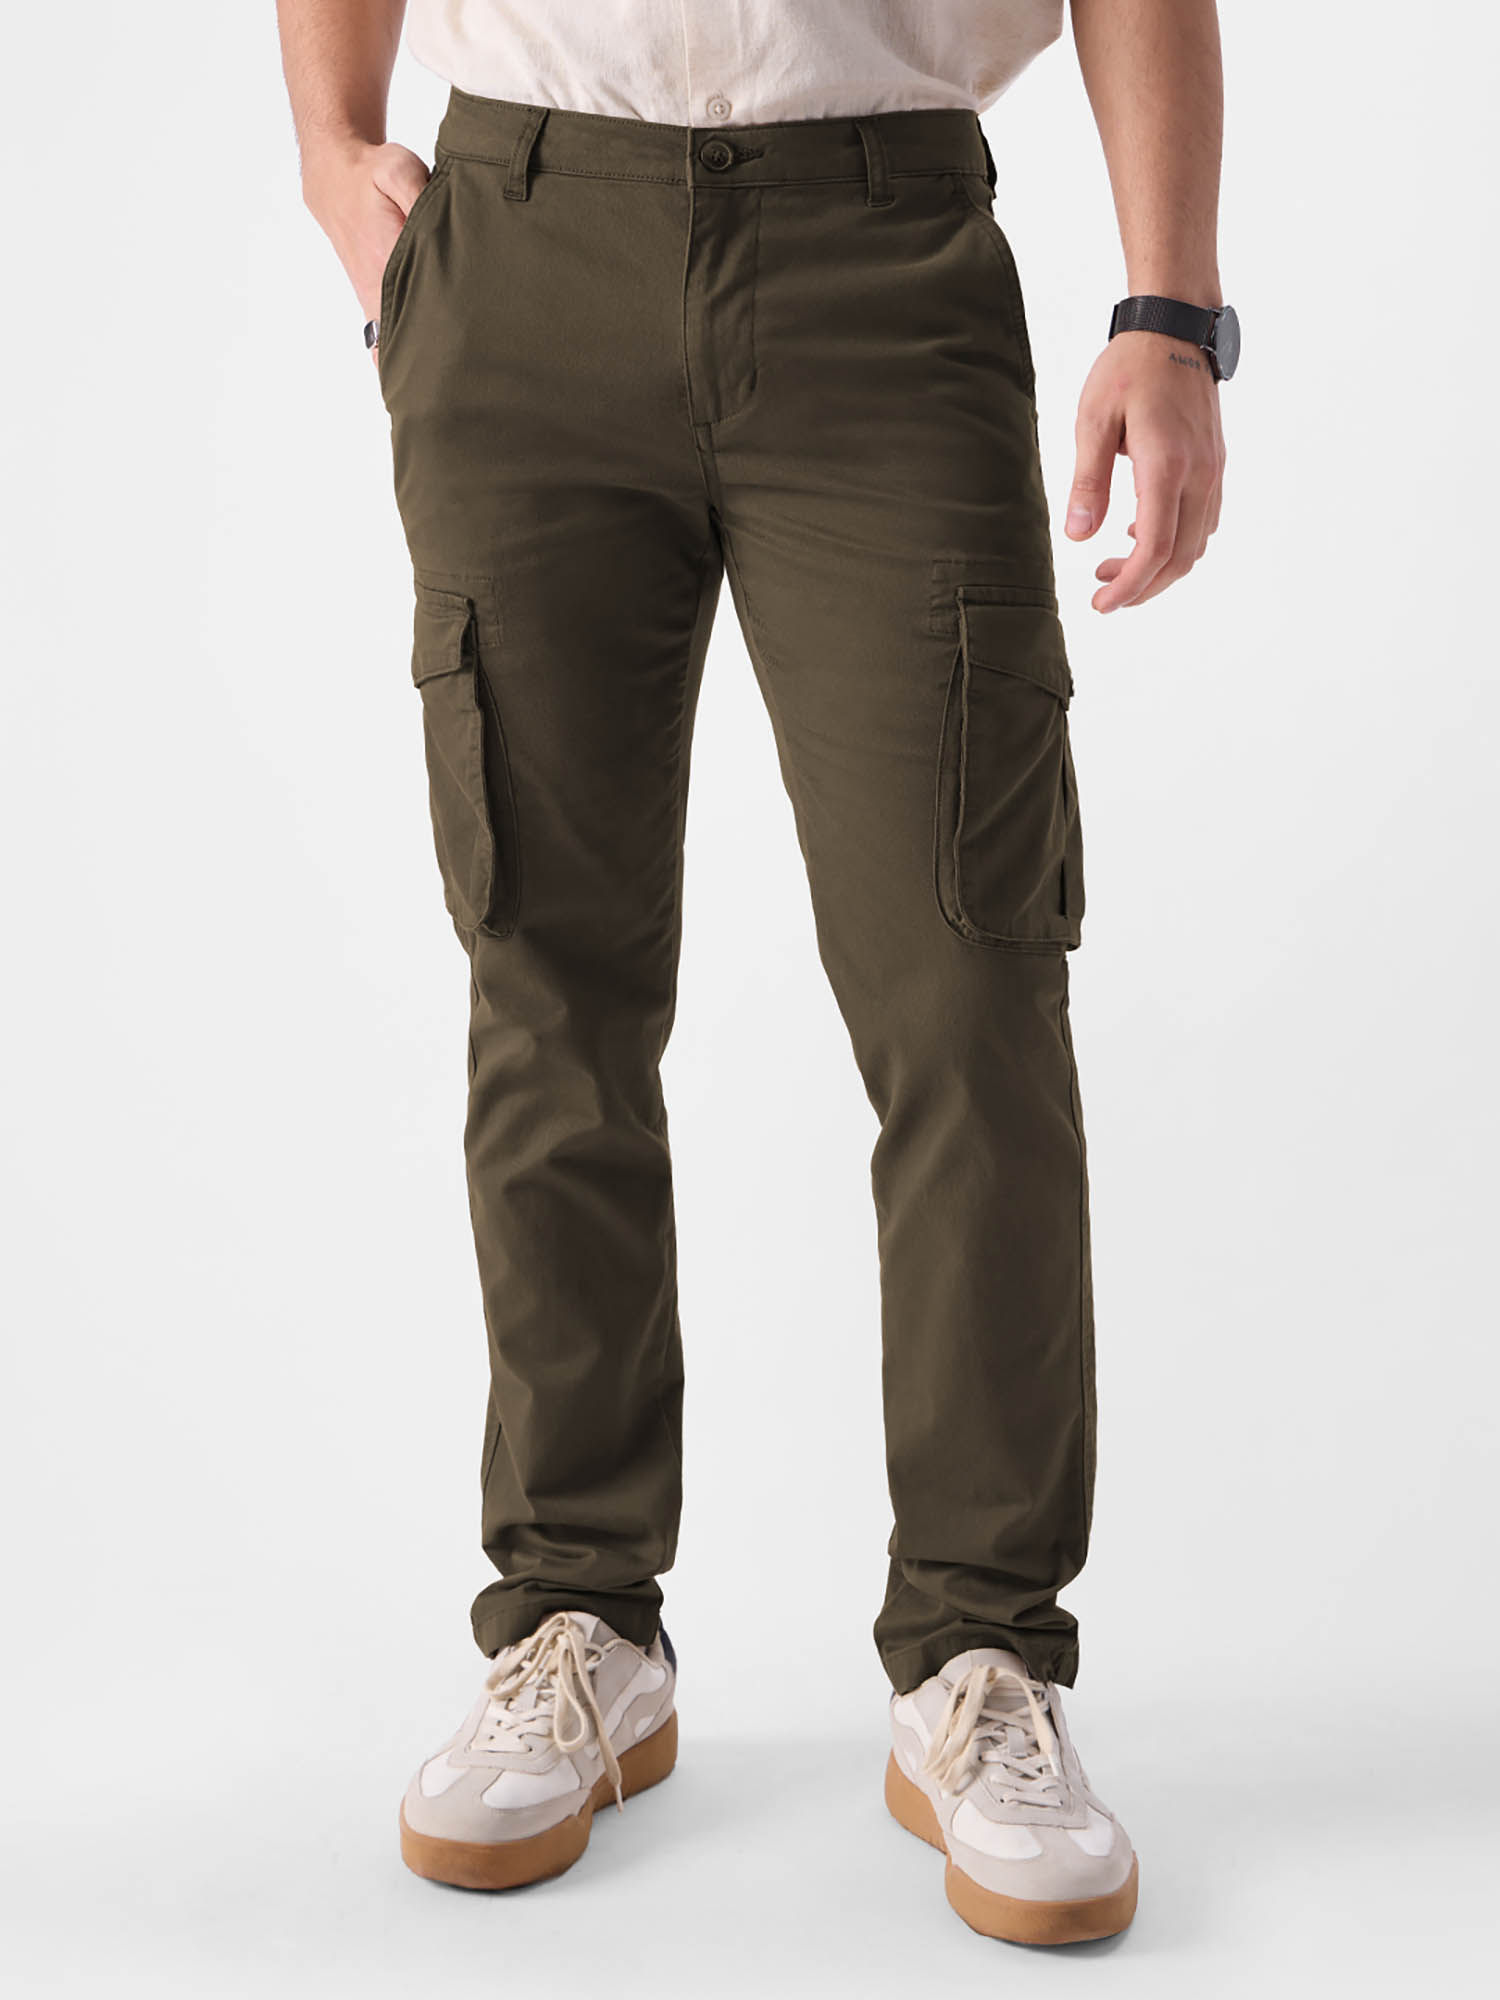 Buy Latest olive green cargo pants mens